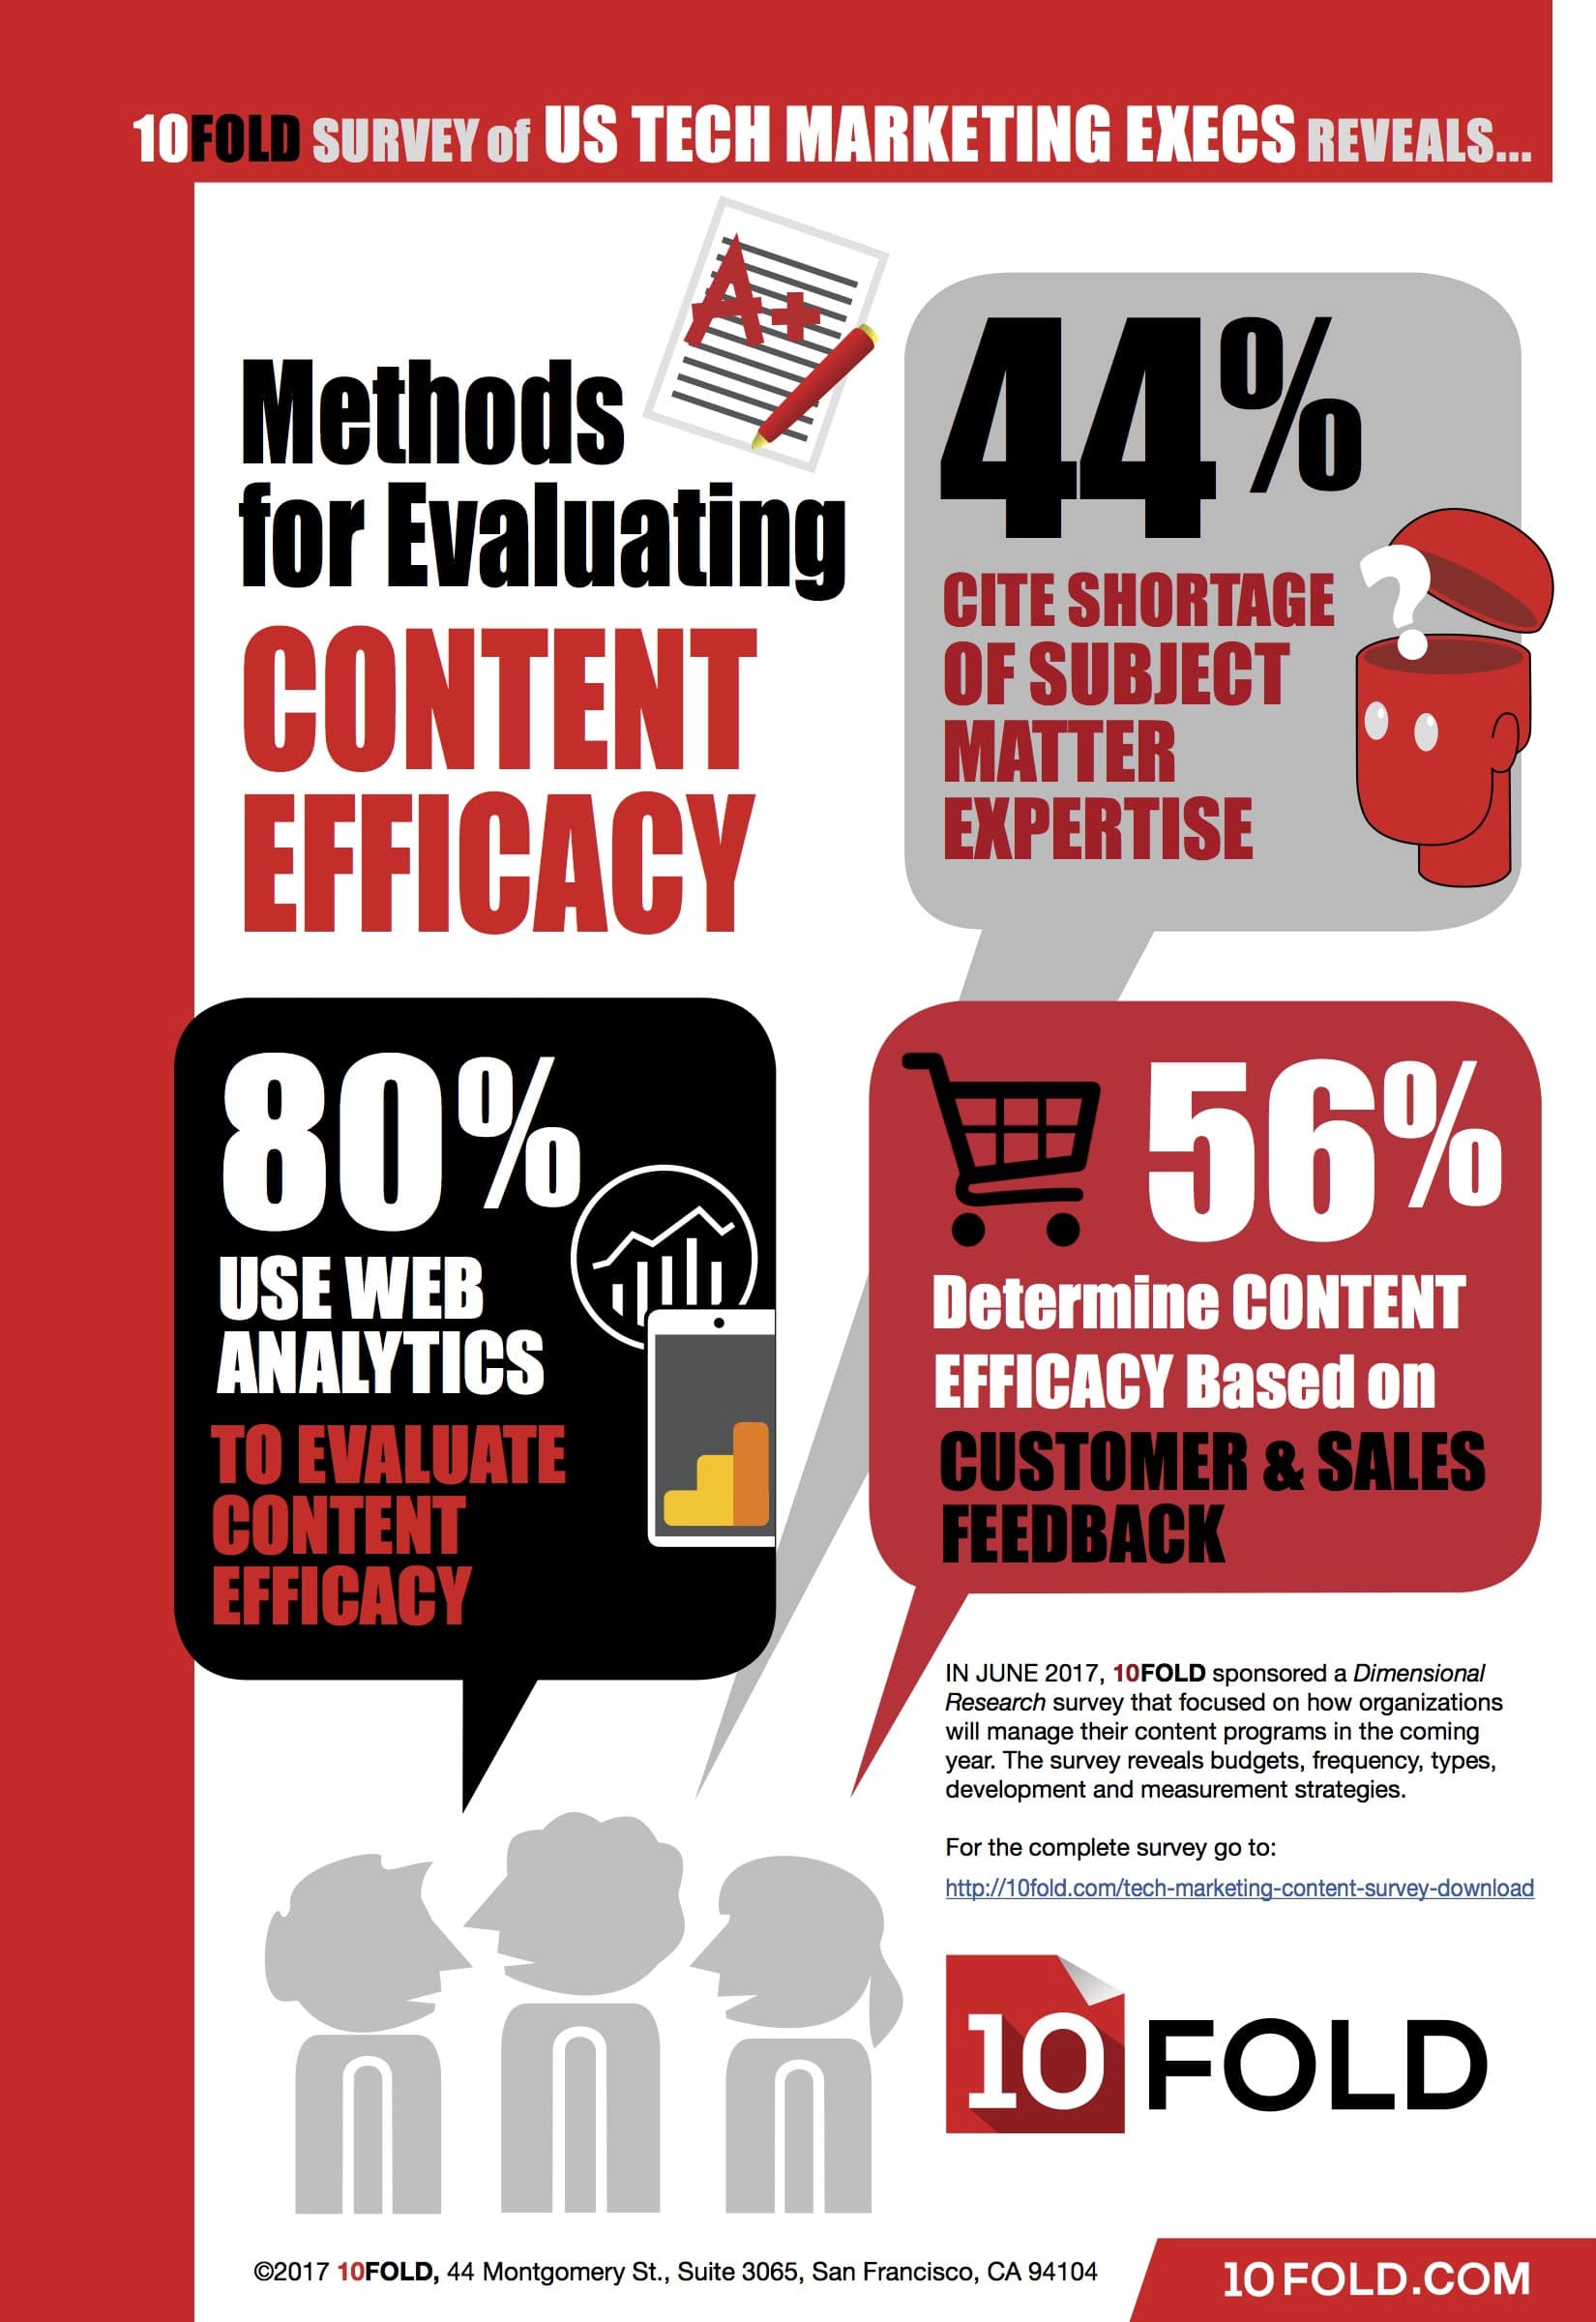 Surprising trends found in new tech marketing content study 